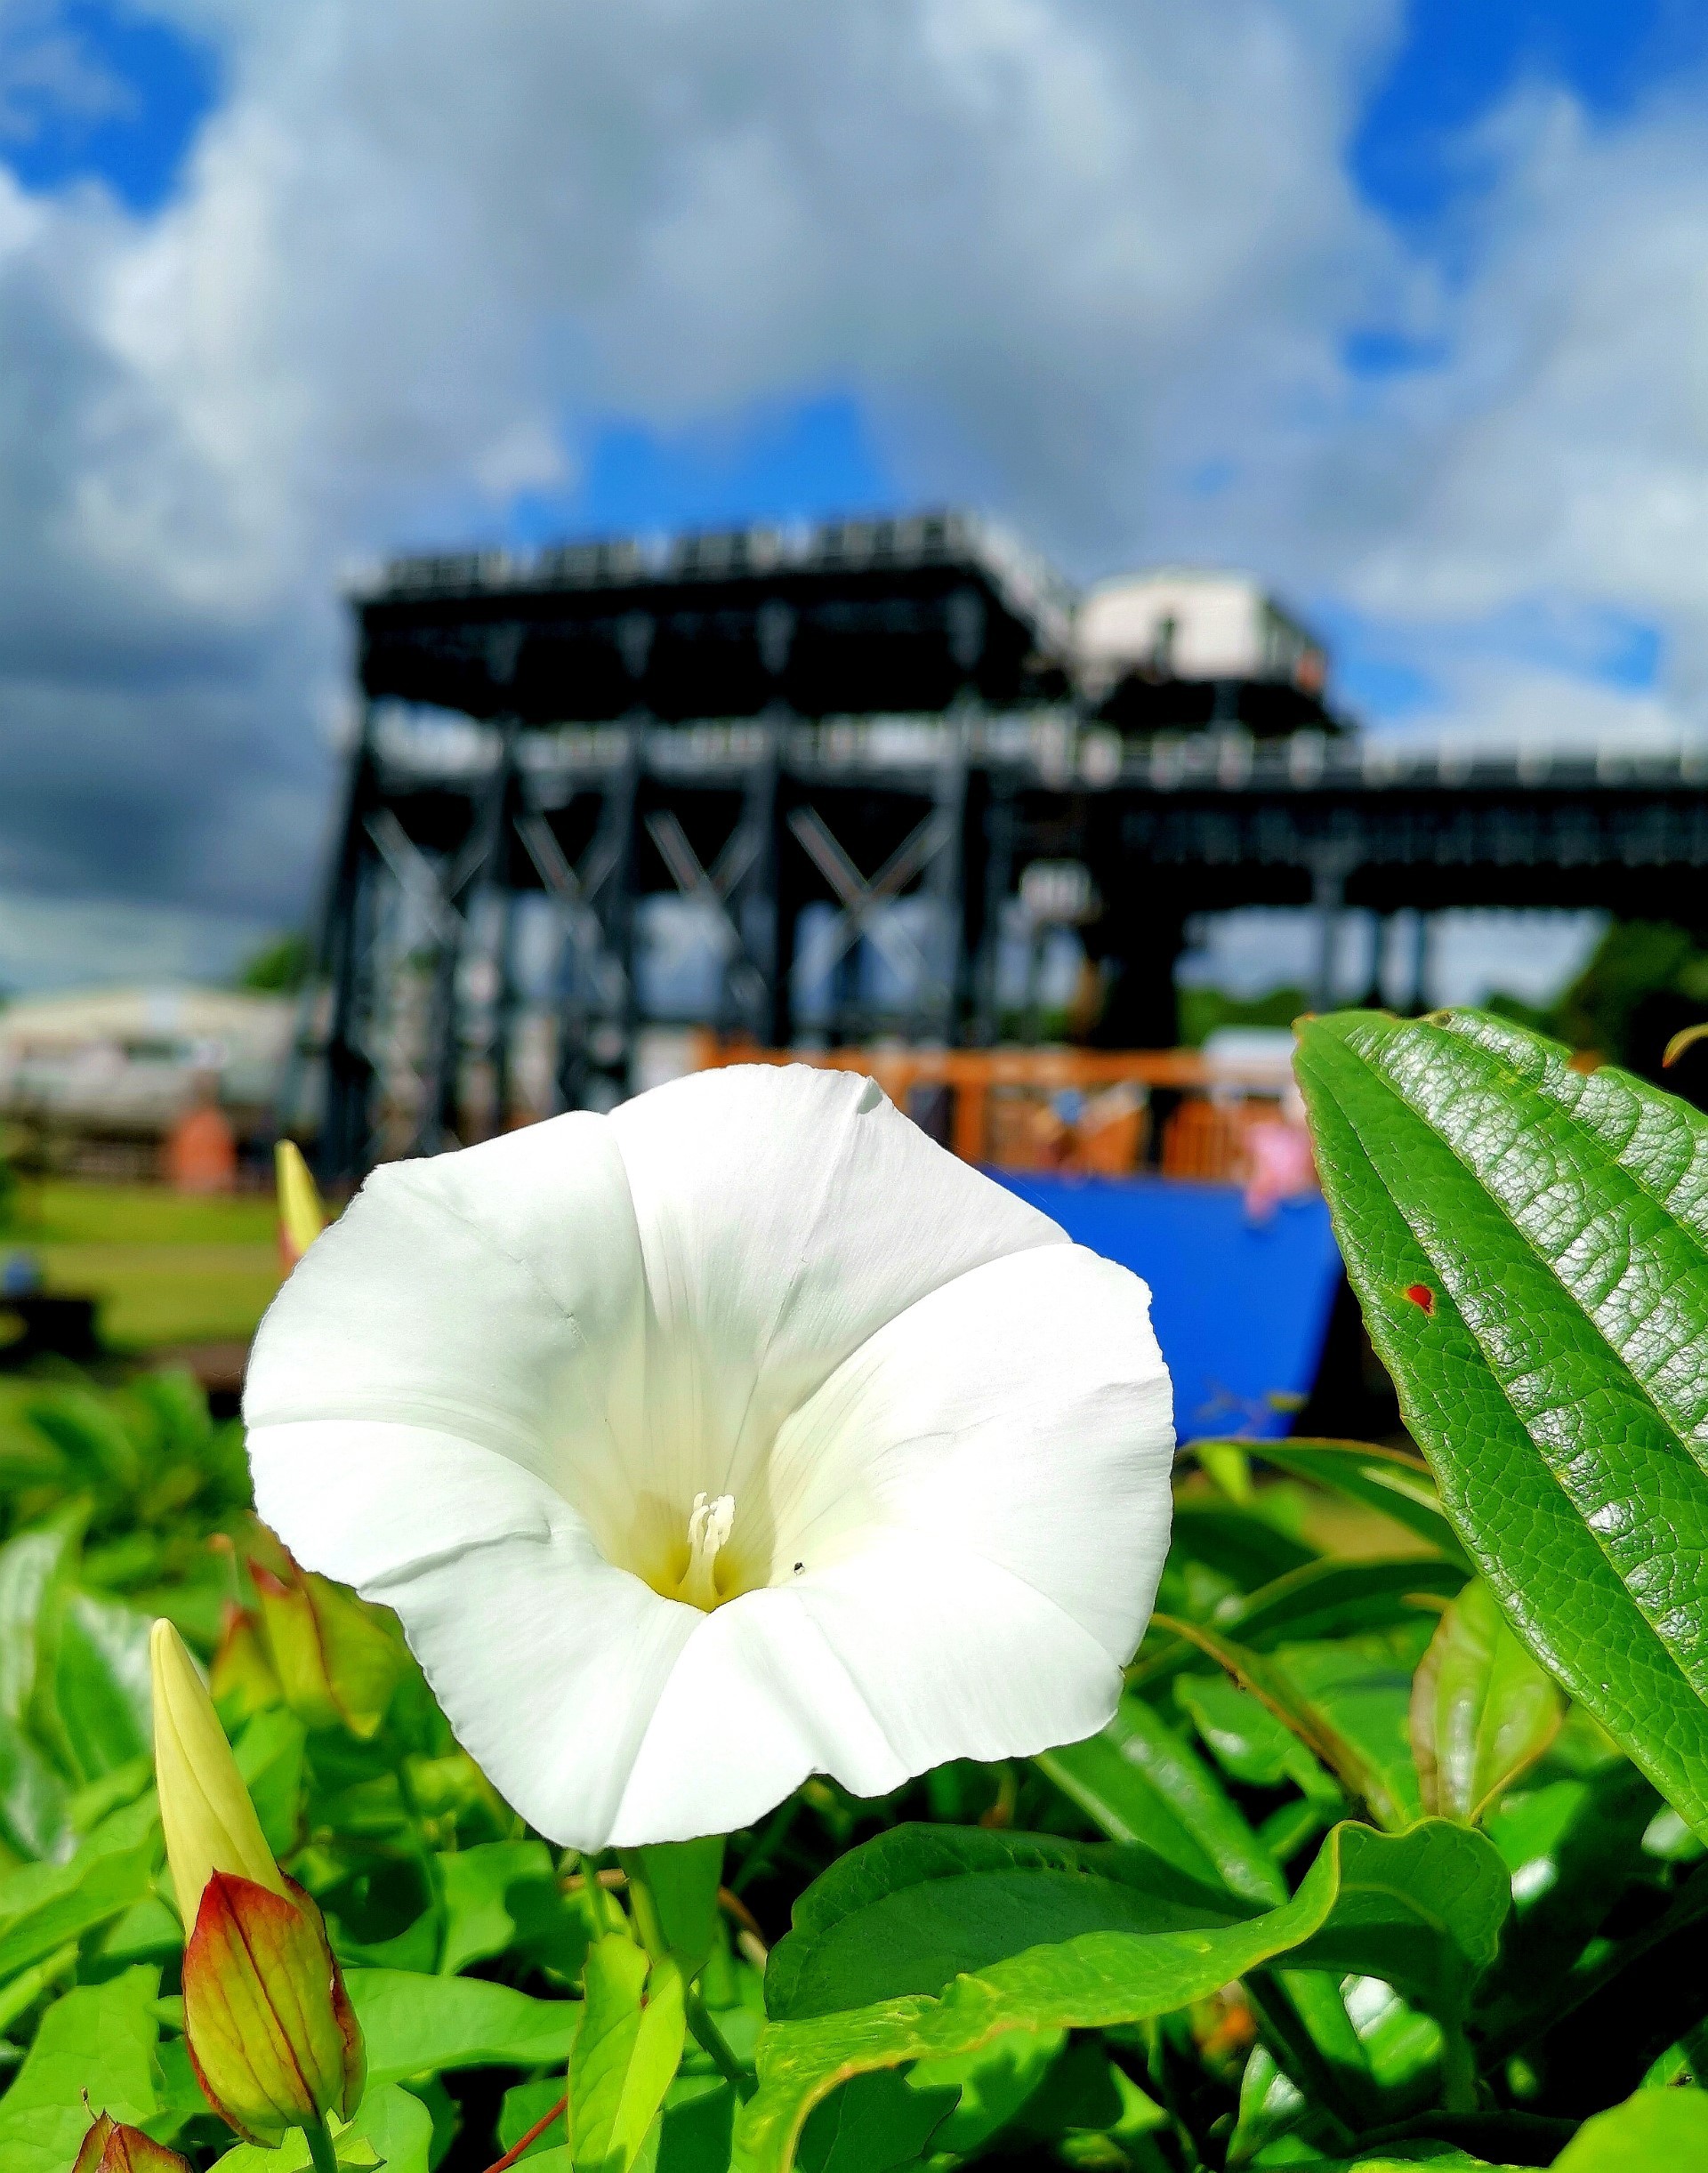 Summer blooms at the Anderton Boat Lift by Mike OMahony